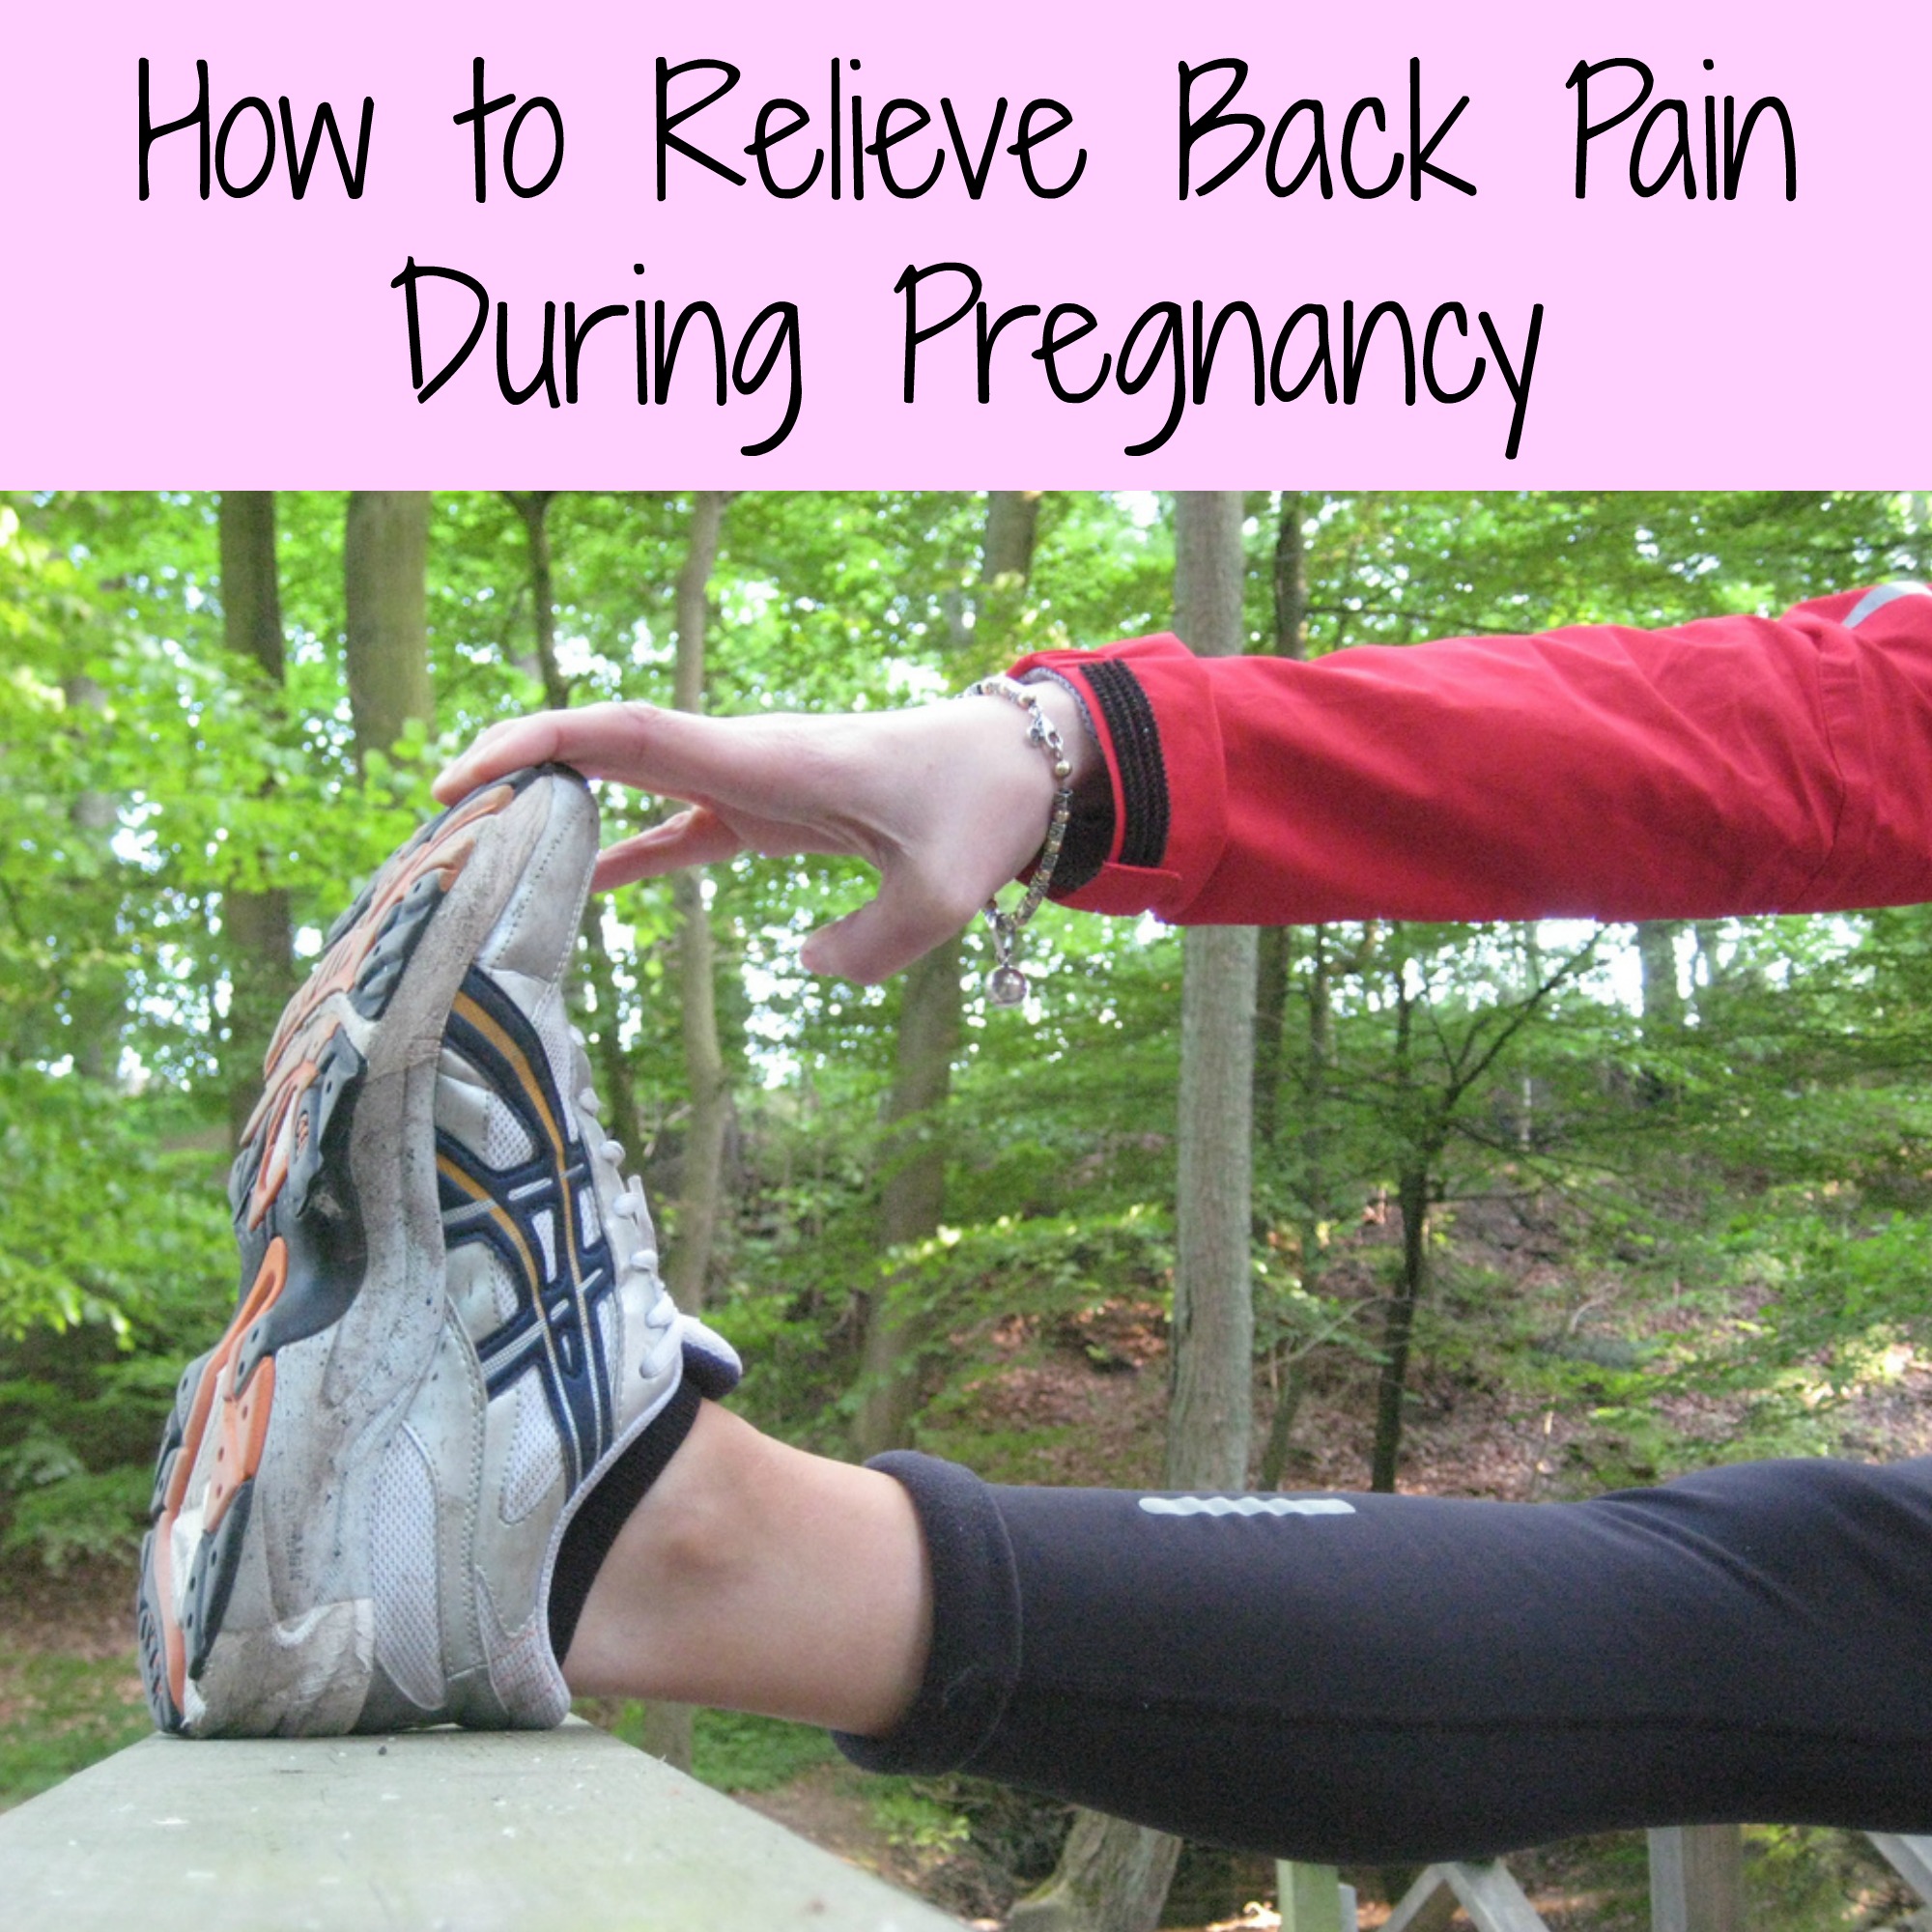 How to Relieve Back Pain During Pregnancy